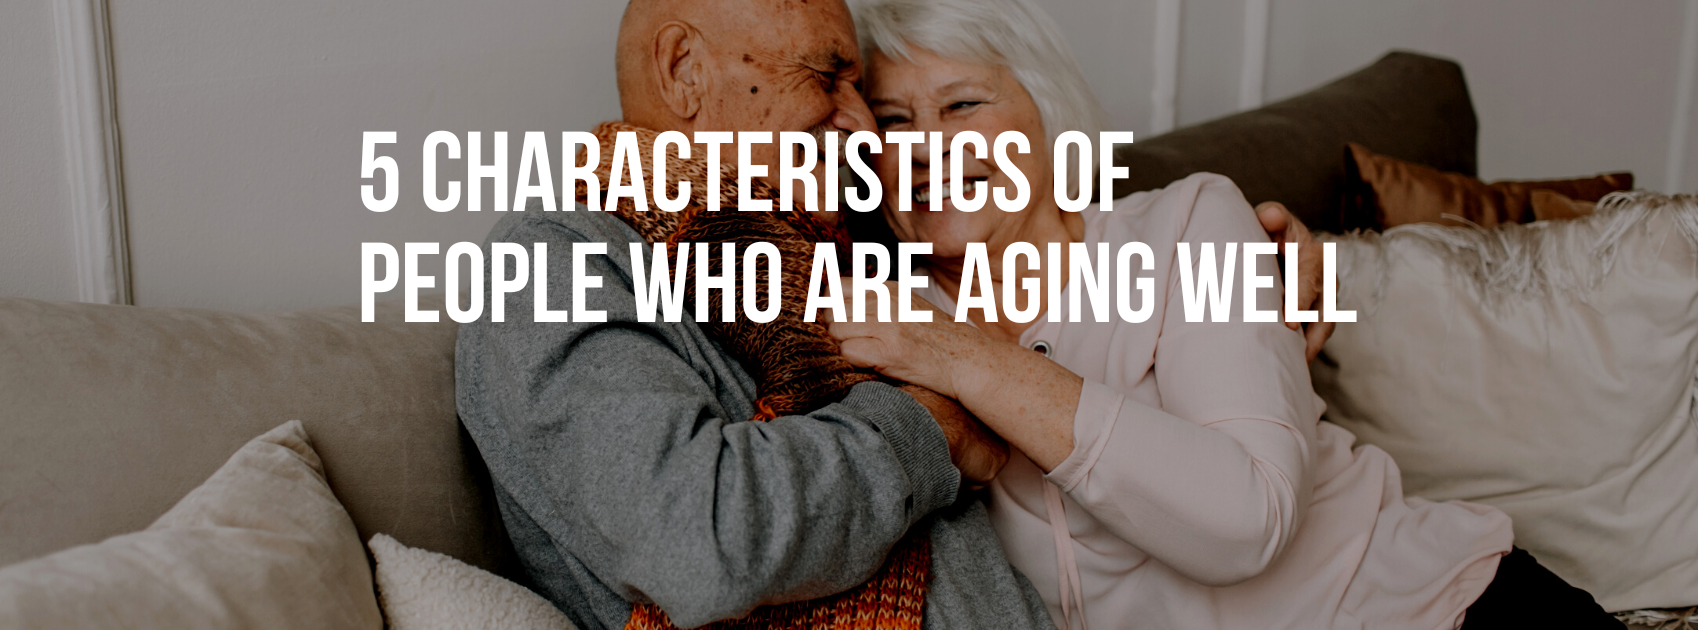 5 Characteristics Of People Who Are Aging Well